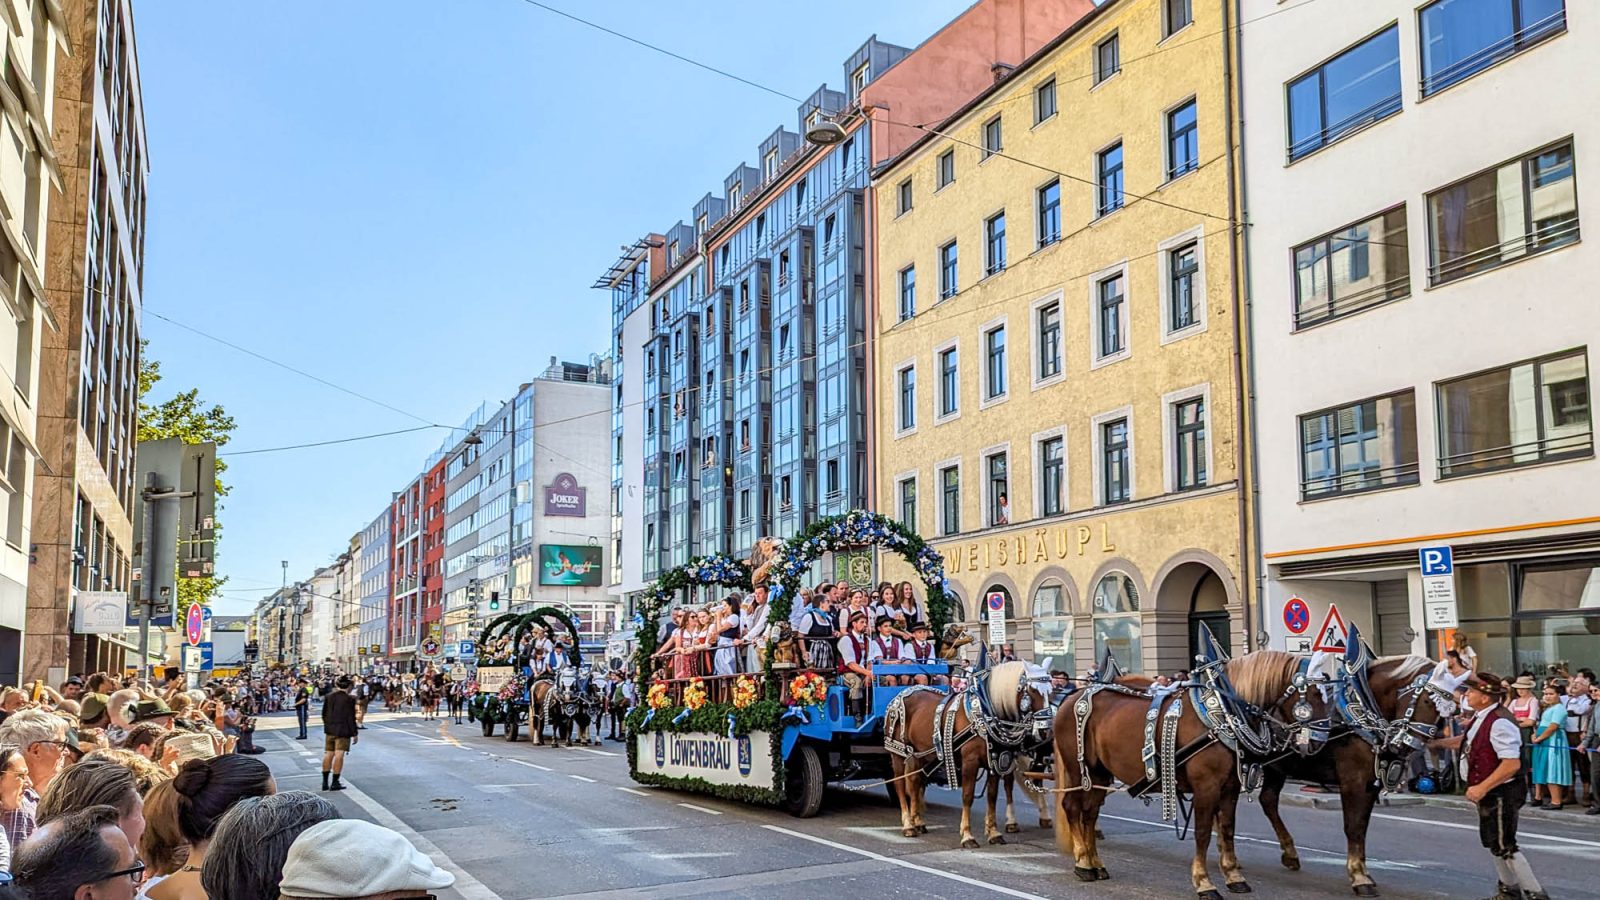 horse-drawn carriage going down a city street lined with people and colorful buildings